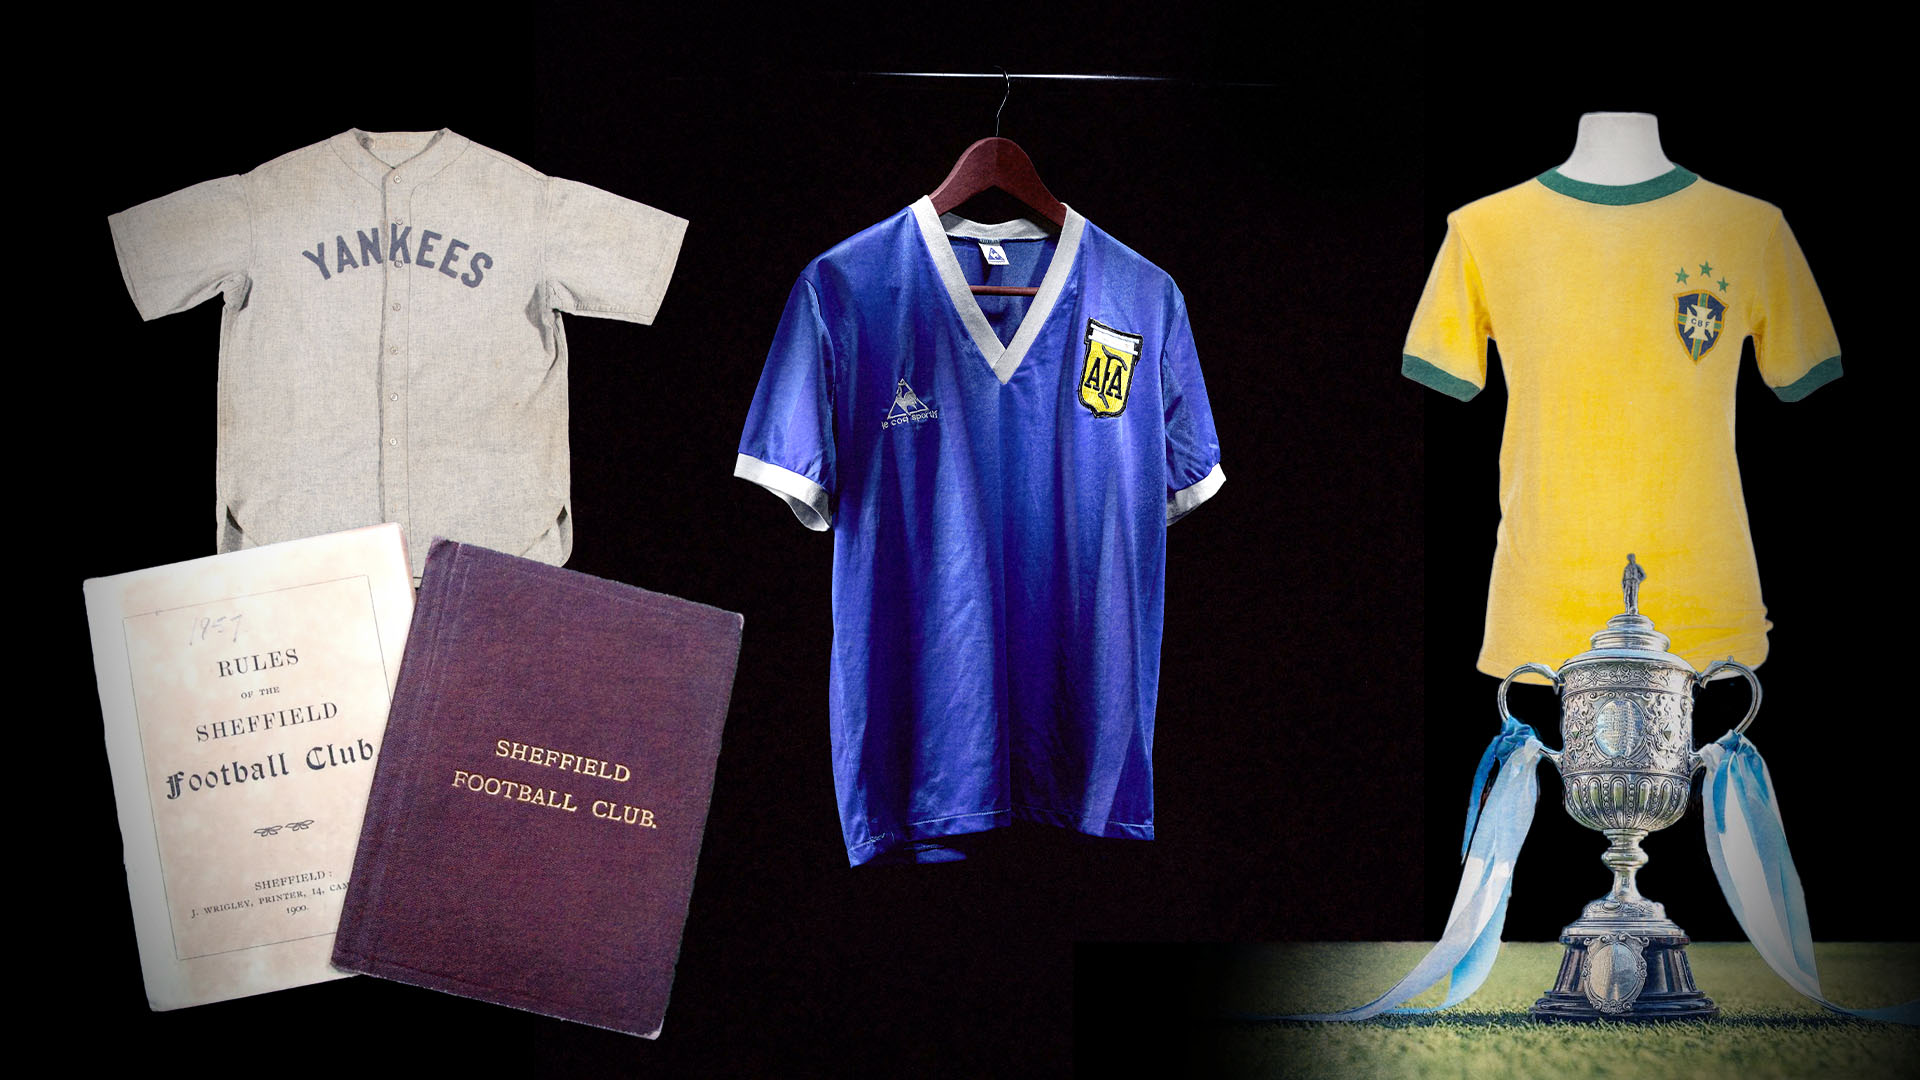 Maradona's shirt may become the most expensive sports object in